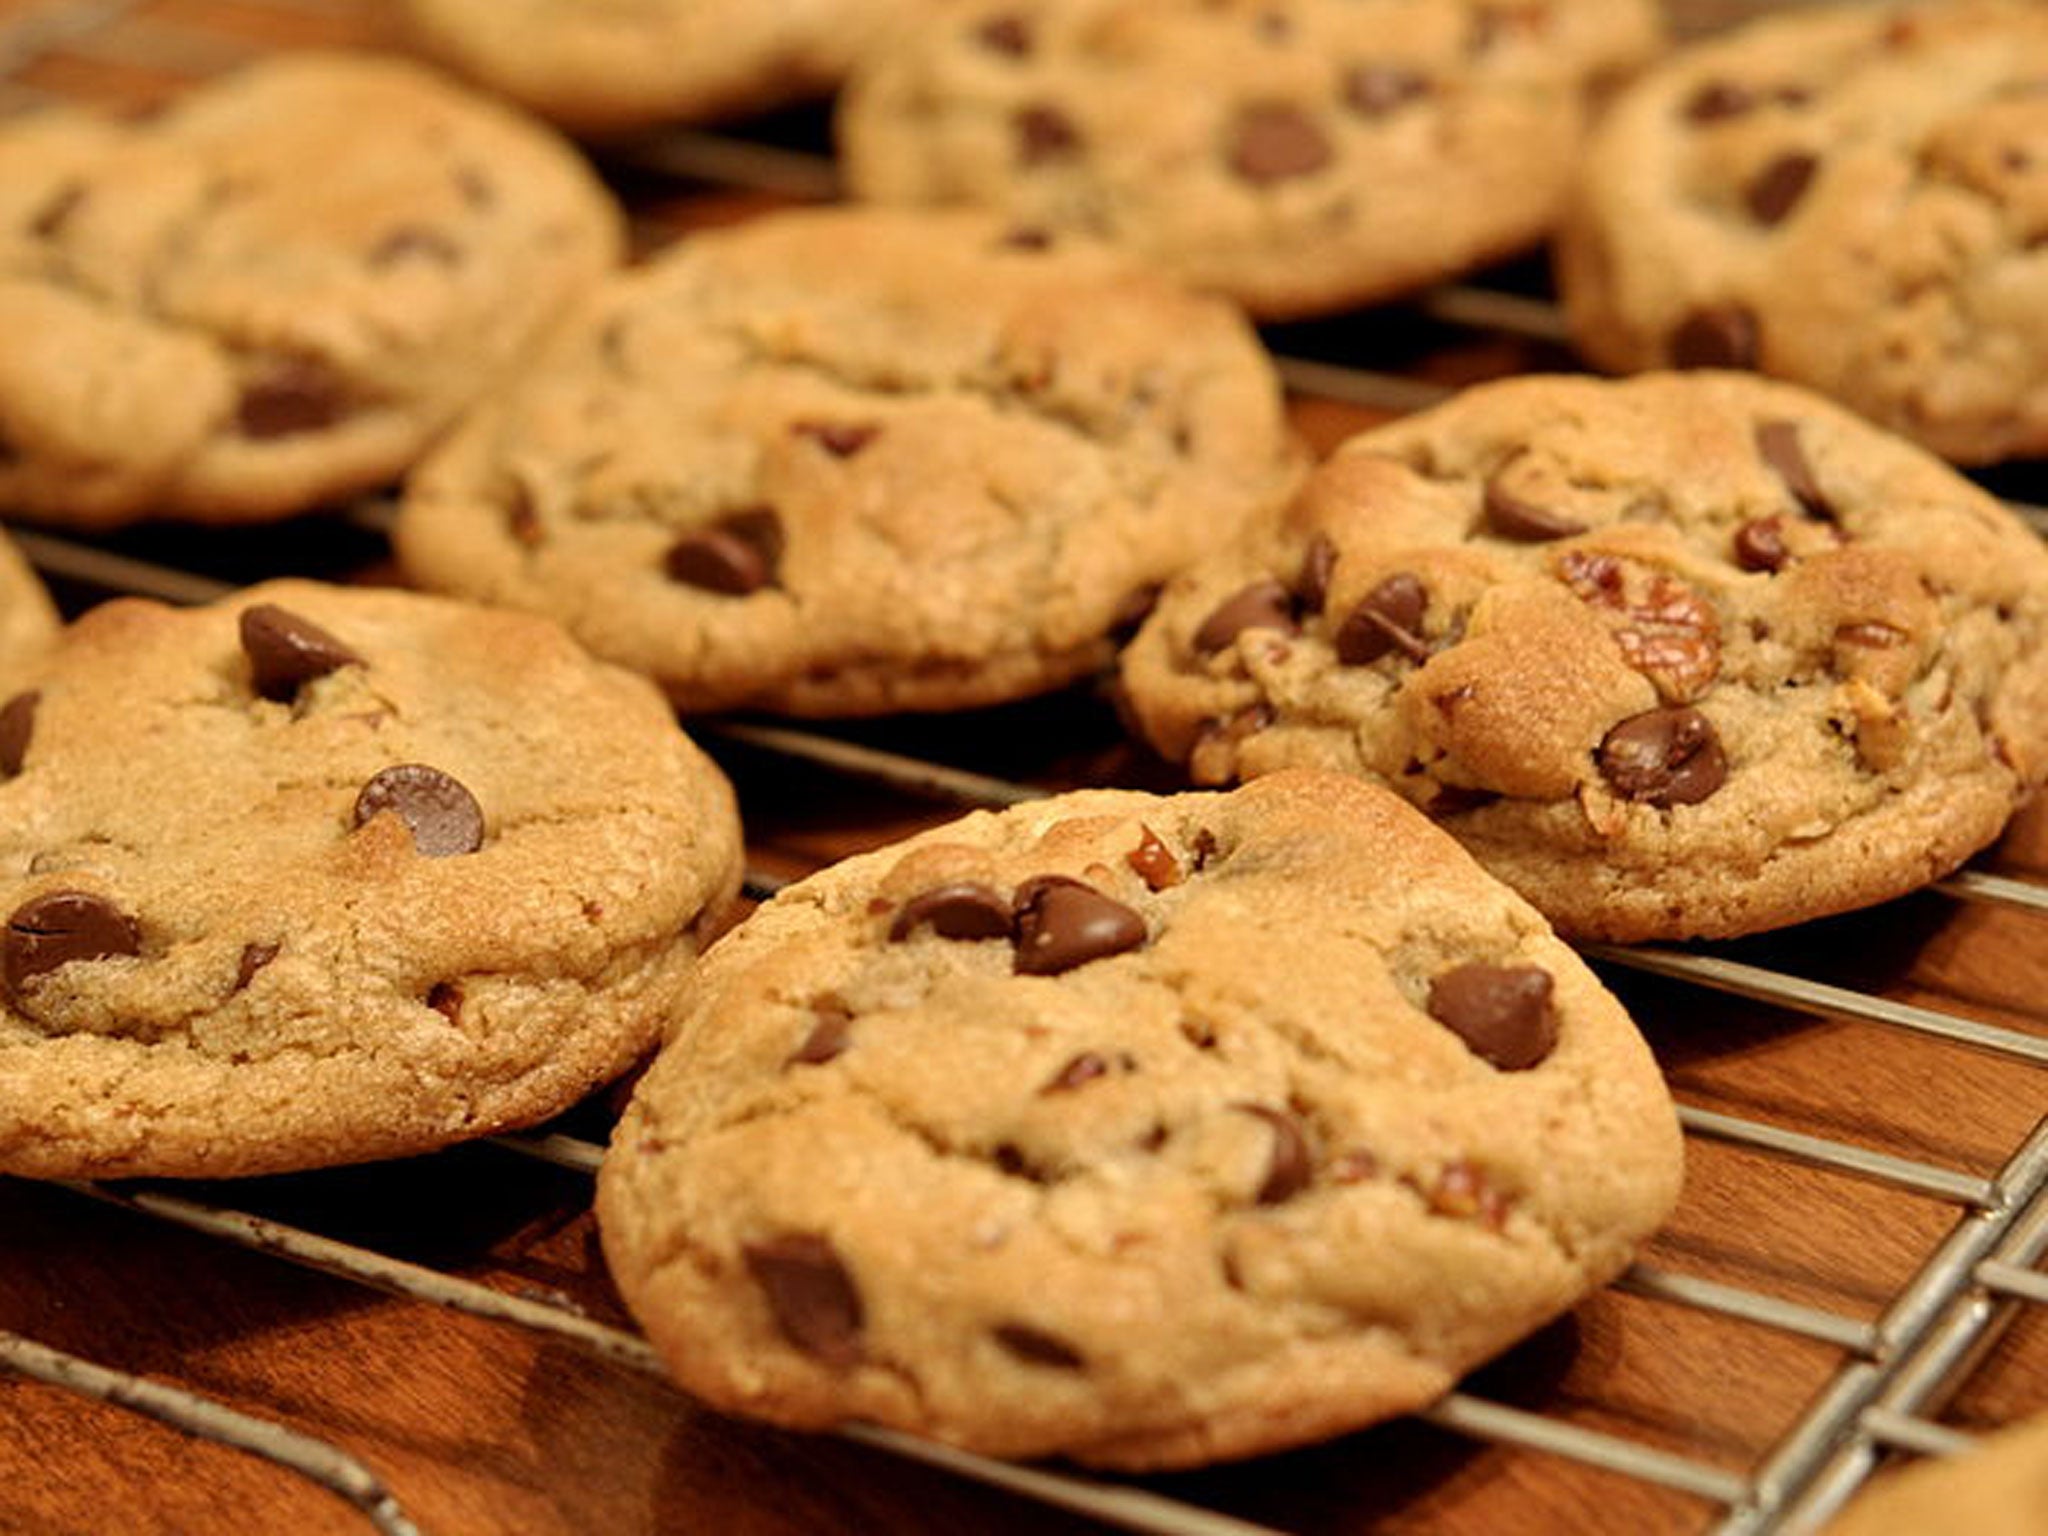 The man was caught tucking into the cookies by a startled church cleaner